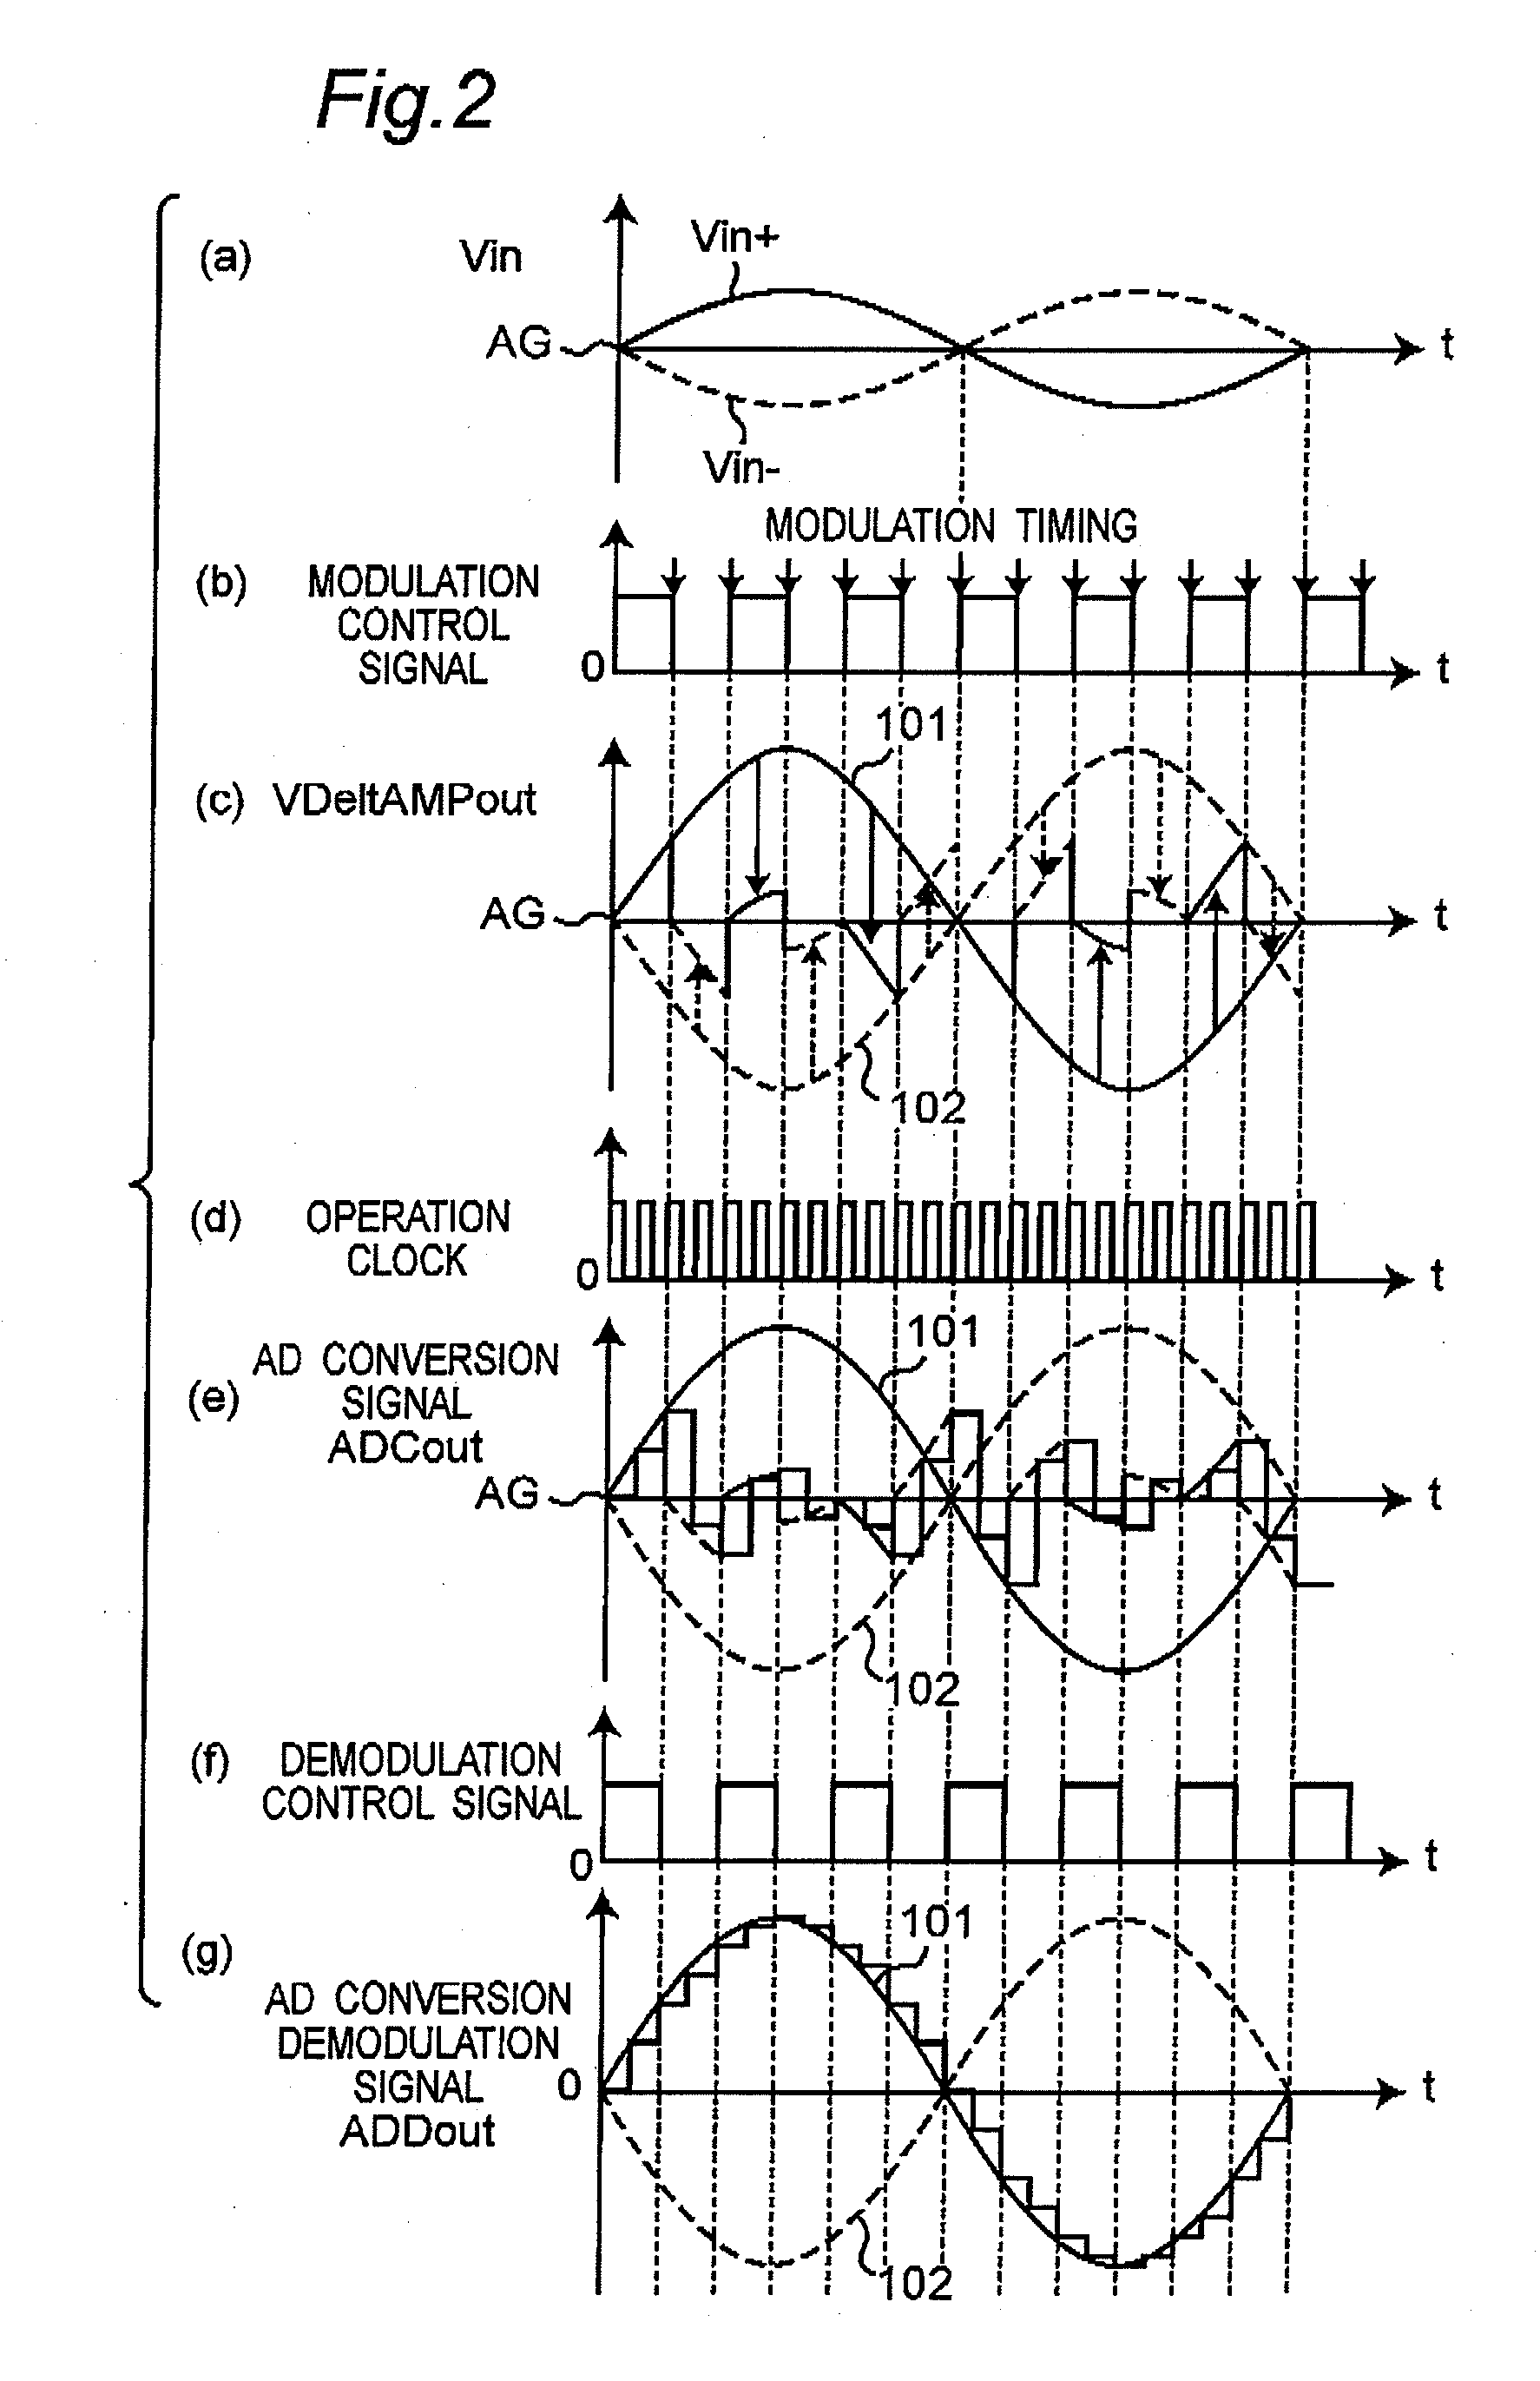 Differential amplifier circuit amplifying differential signals with selectively switching between differential signals and ad converter apparatus